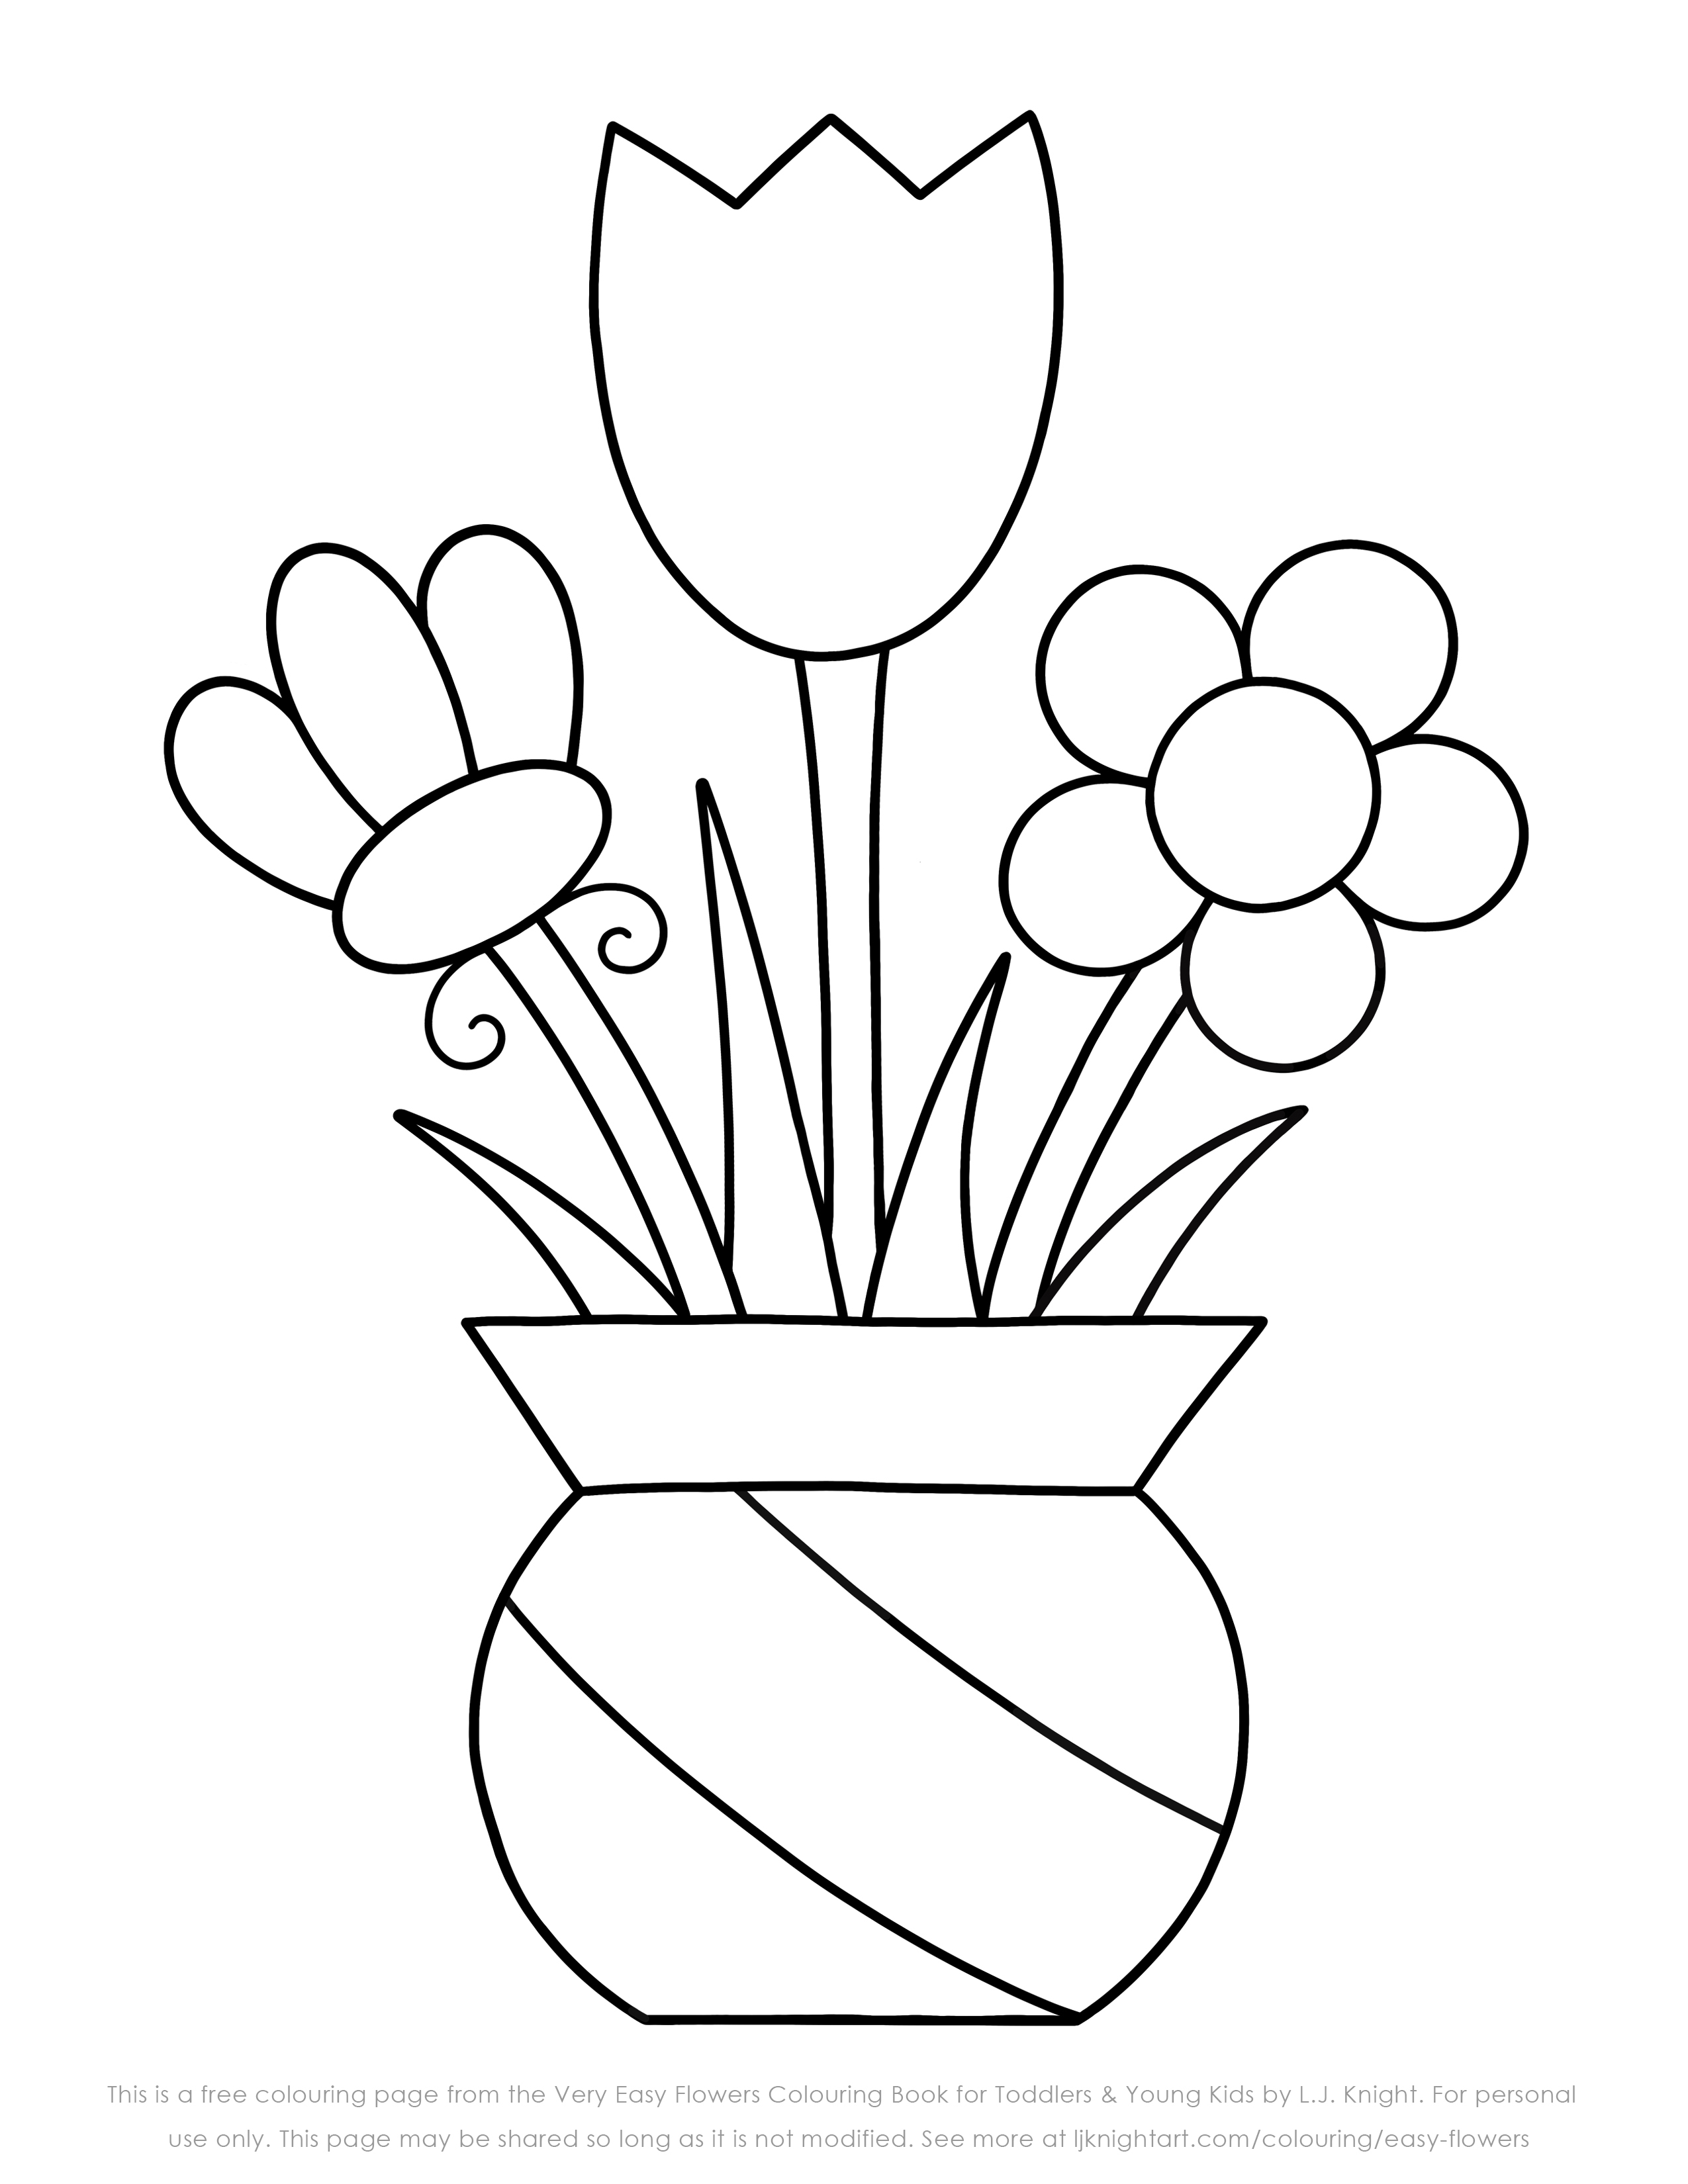 New – Very Easy Flowers Colouring Book for Toddlers and Young Kids | L